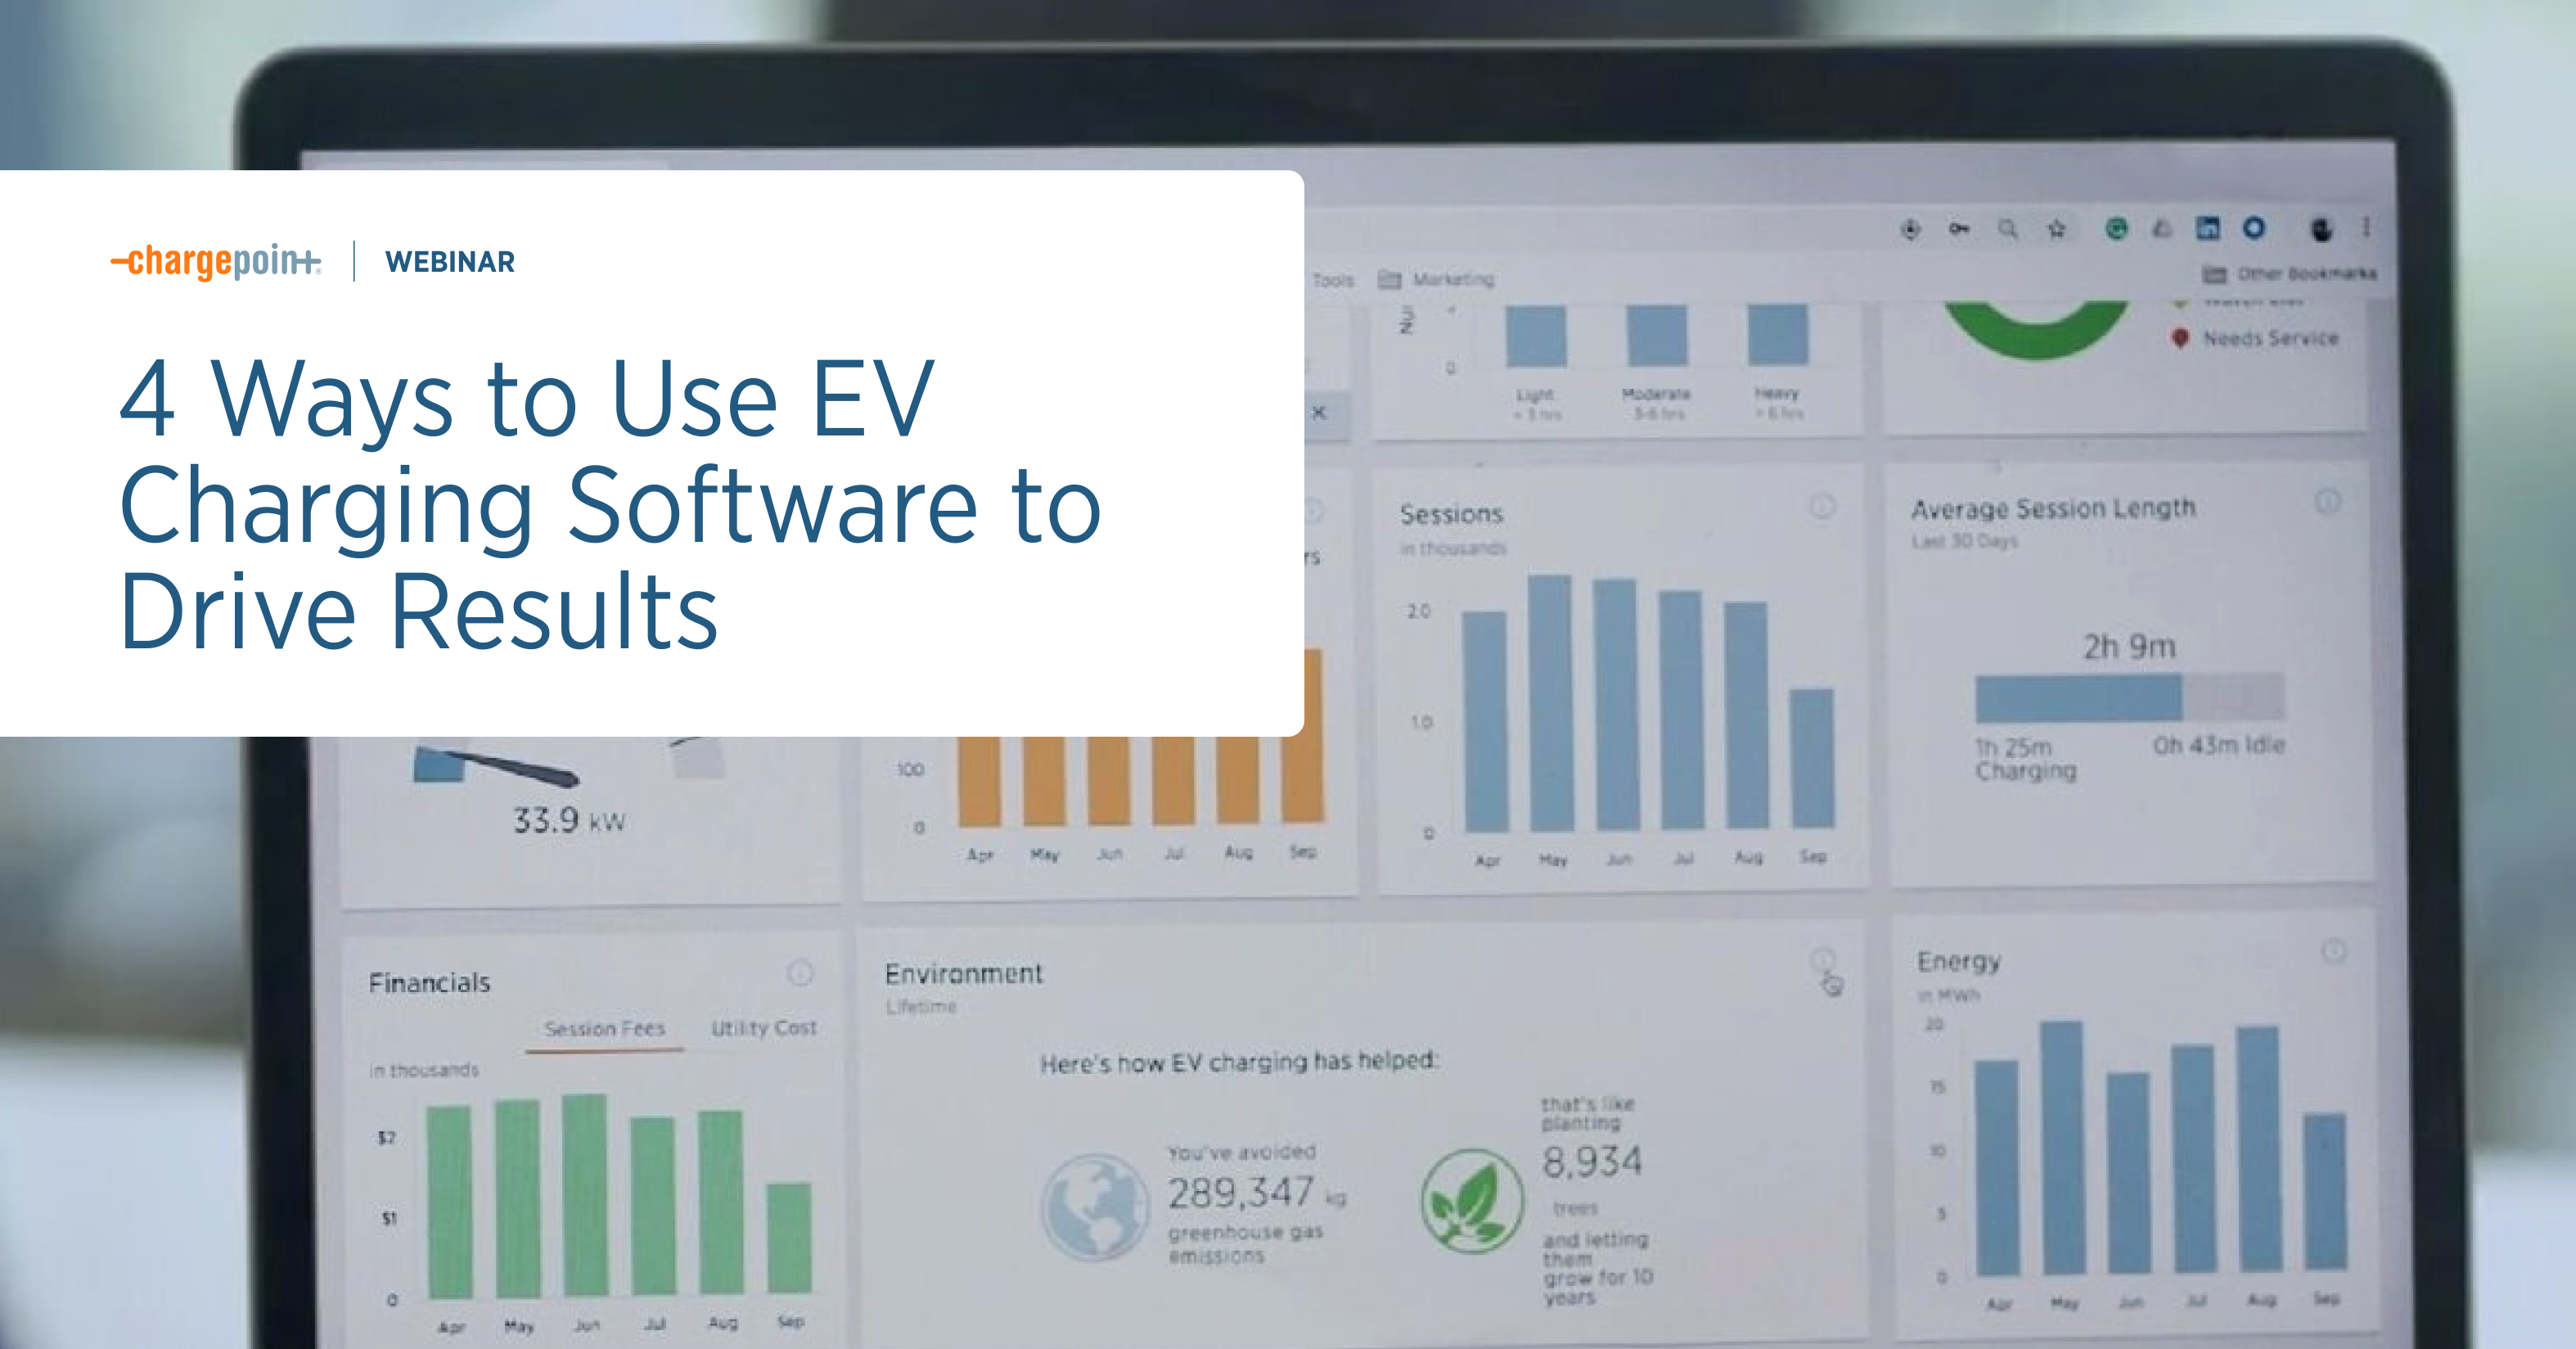 Webinar: 4 Ways to Use EV Charging Software to Drive Results 